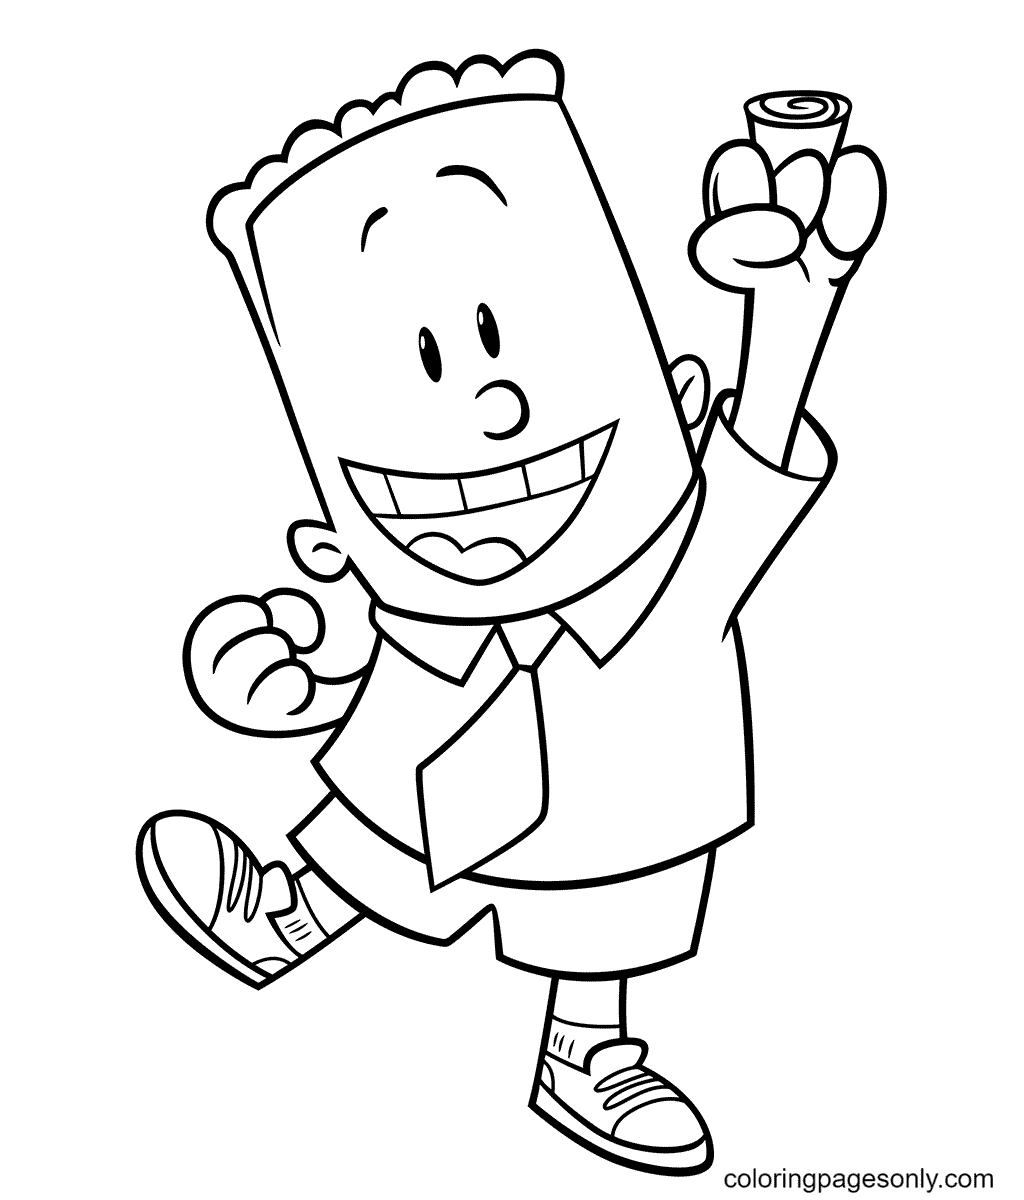 George Beard from Captain Underpants Coloring Page